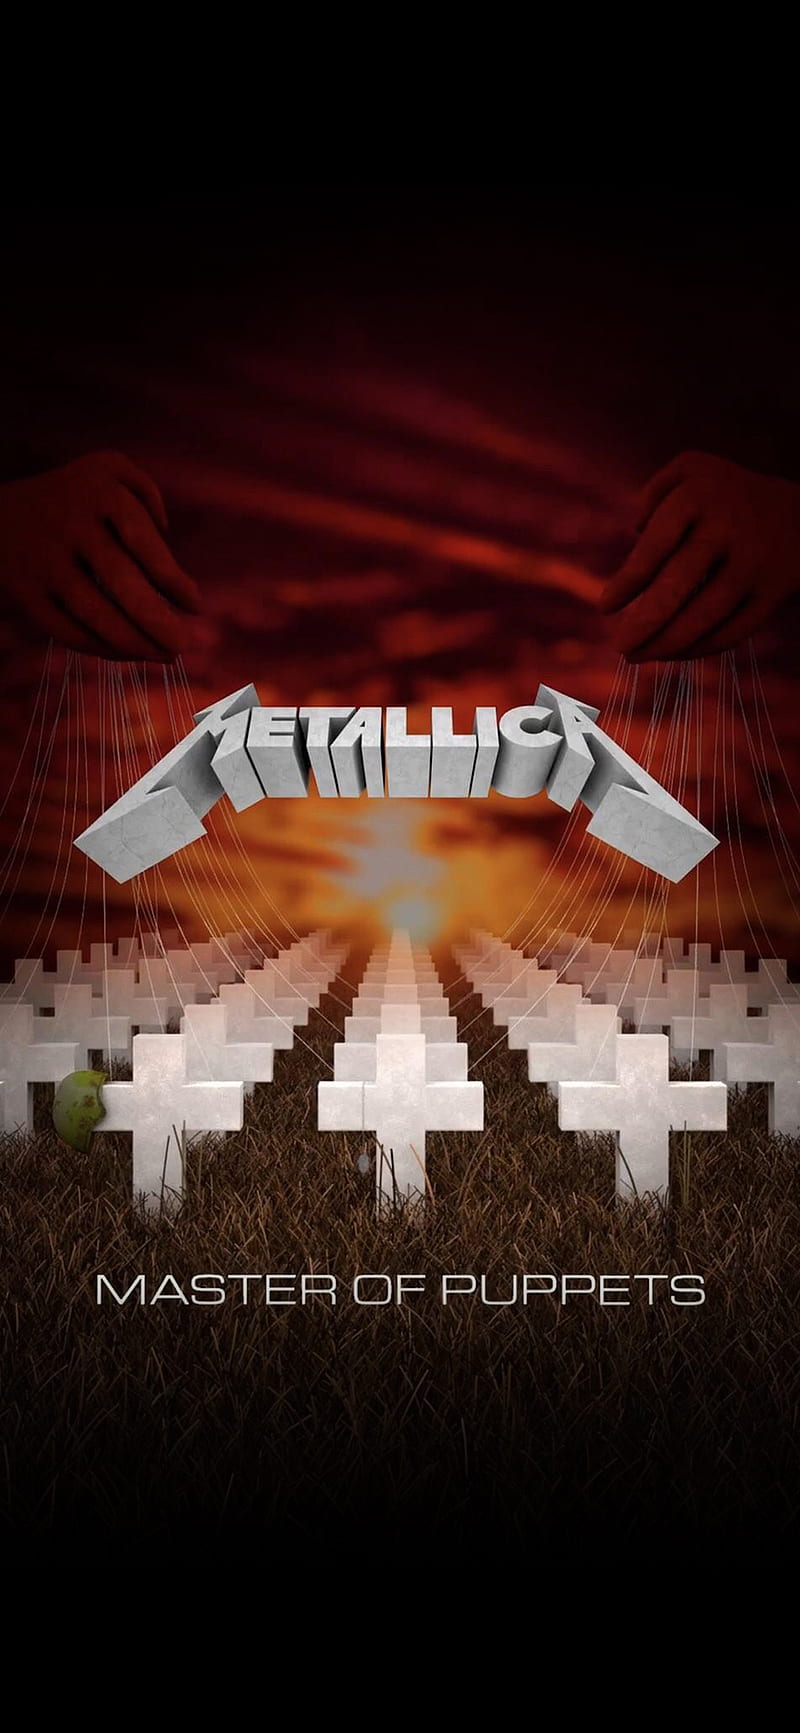 Metallica, background, cd cover, master of puppets, HD phone wallpaper